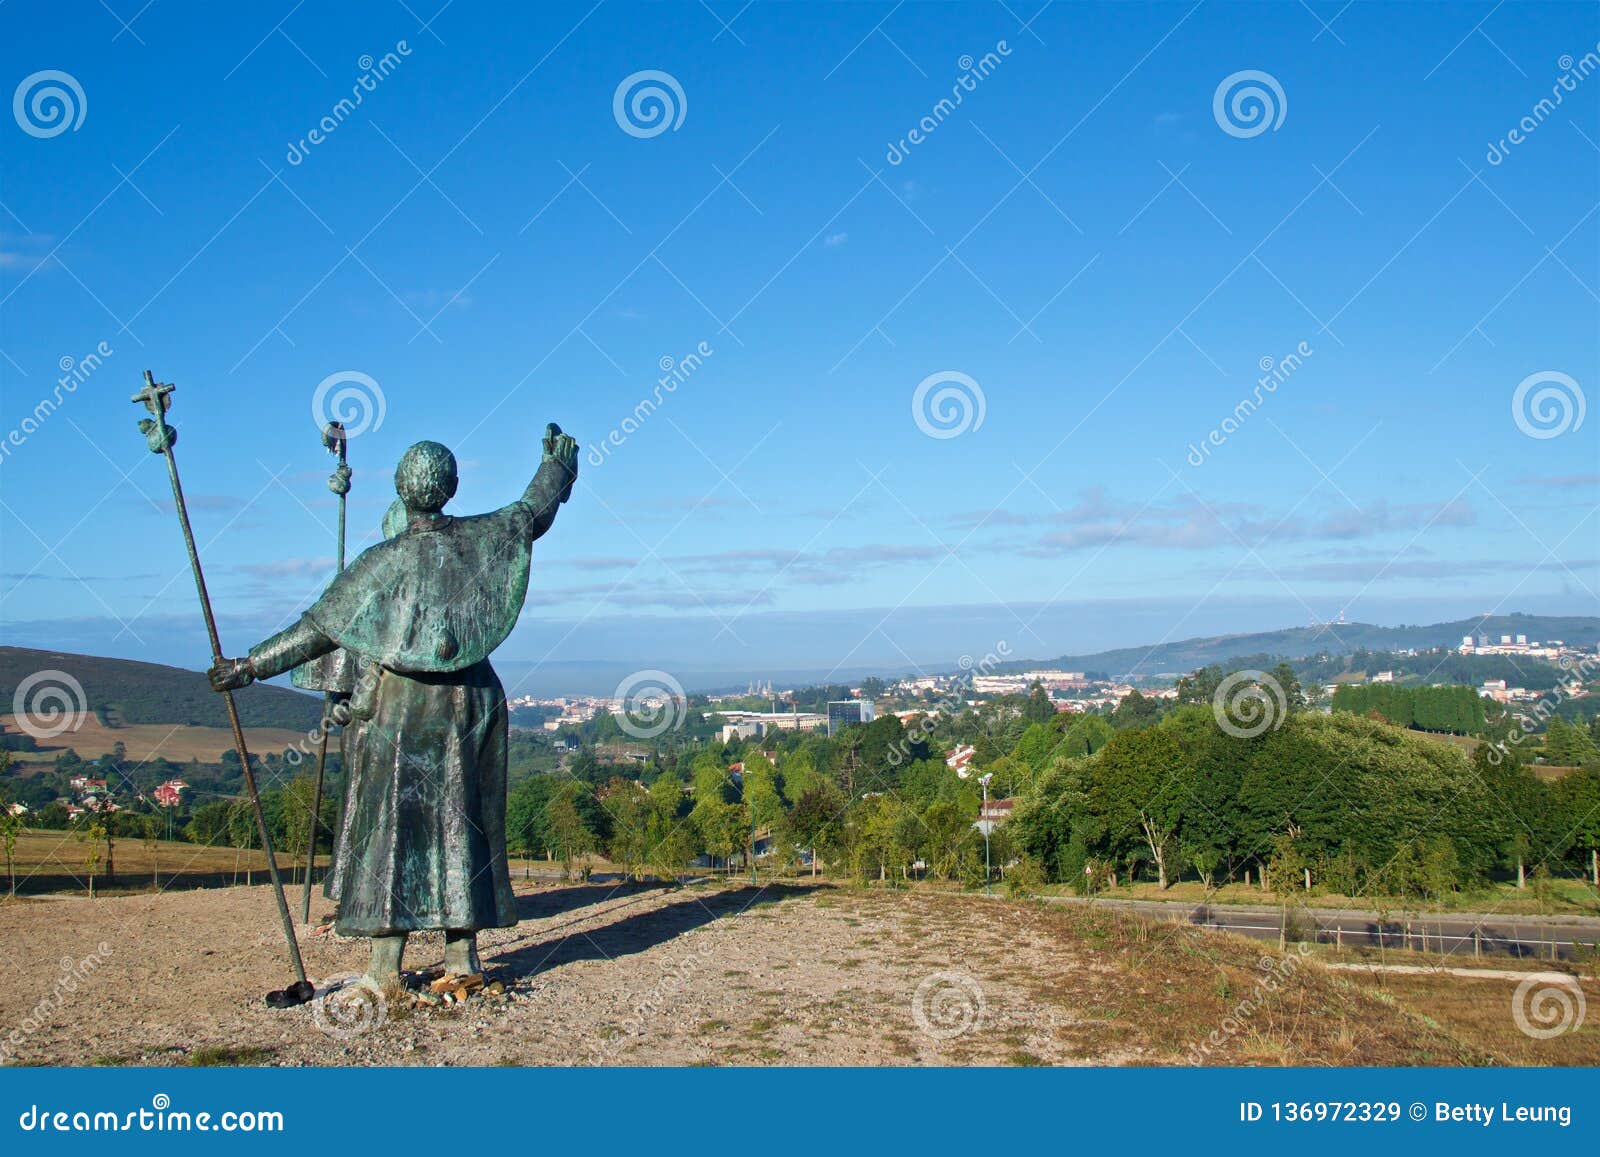 statues of pilgrims pointing the cathedral on monte do gozo in santiago de compostela, spain